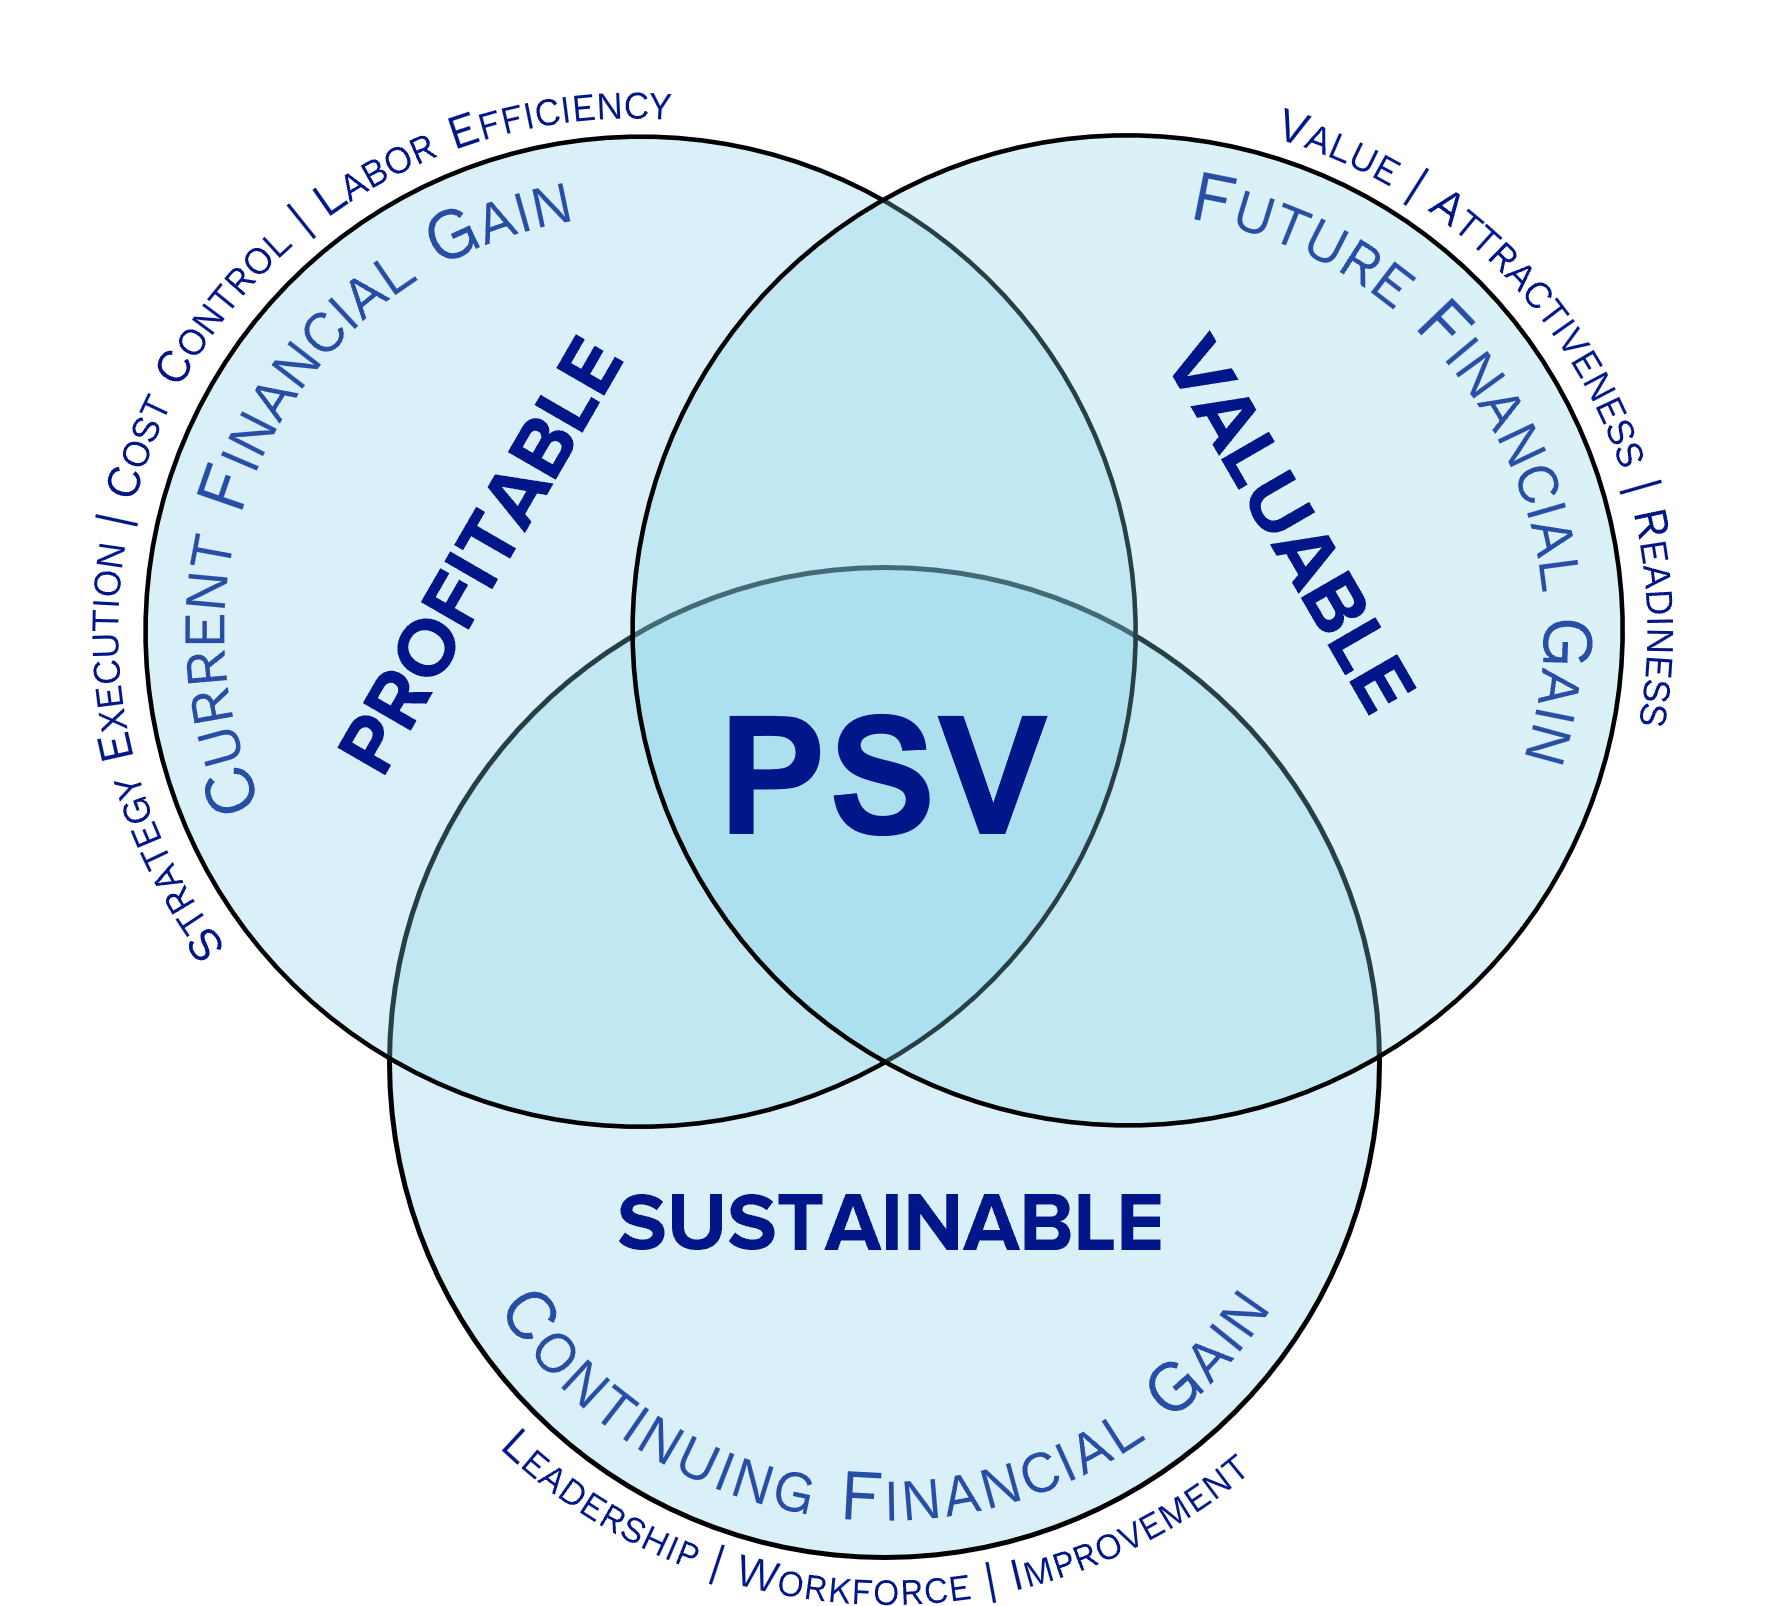 PSV Model NoIntersections.png